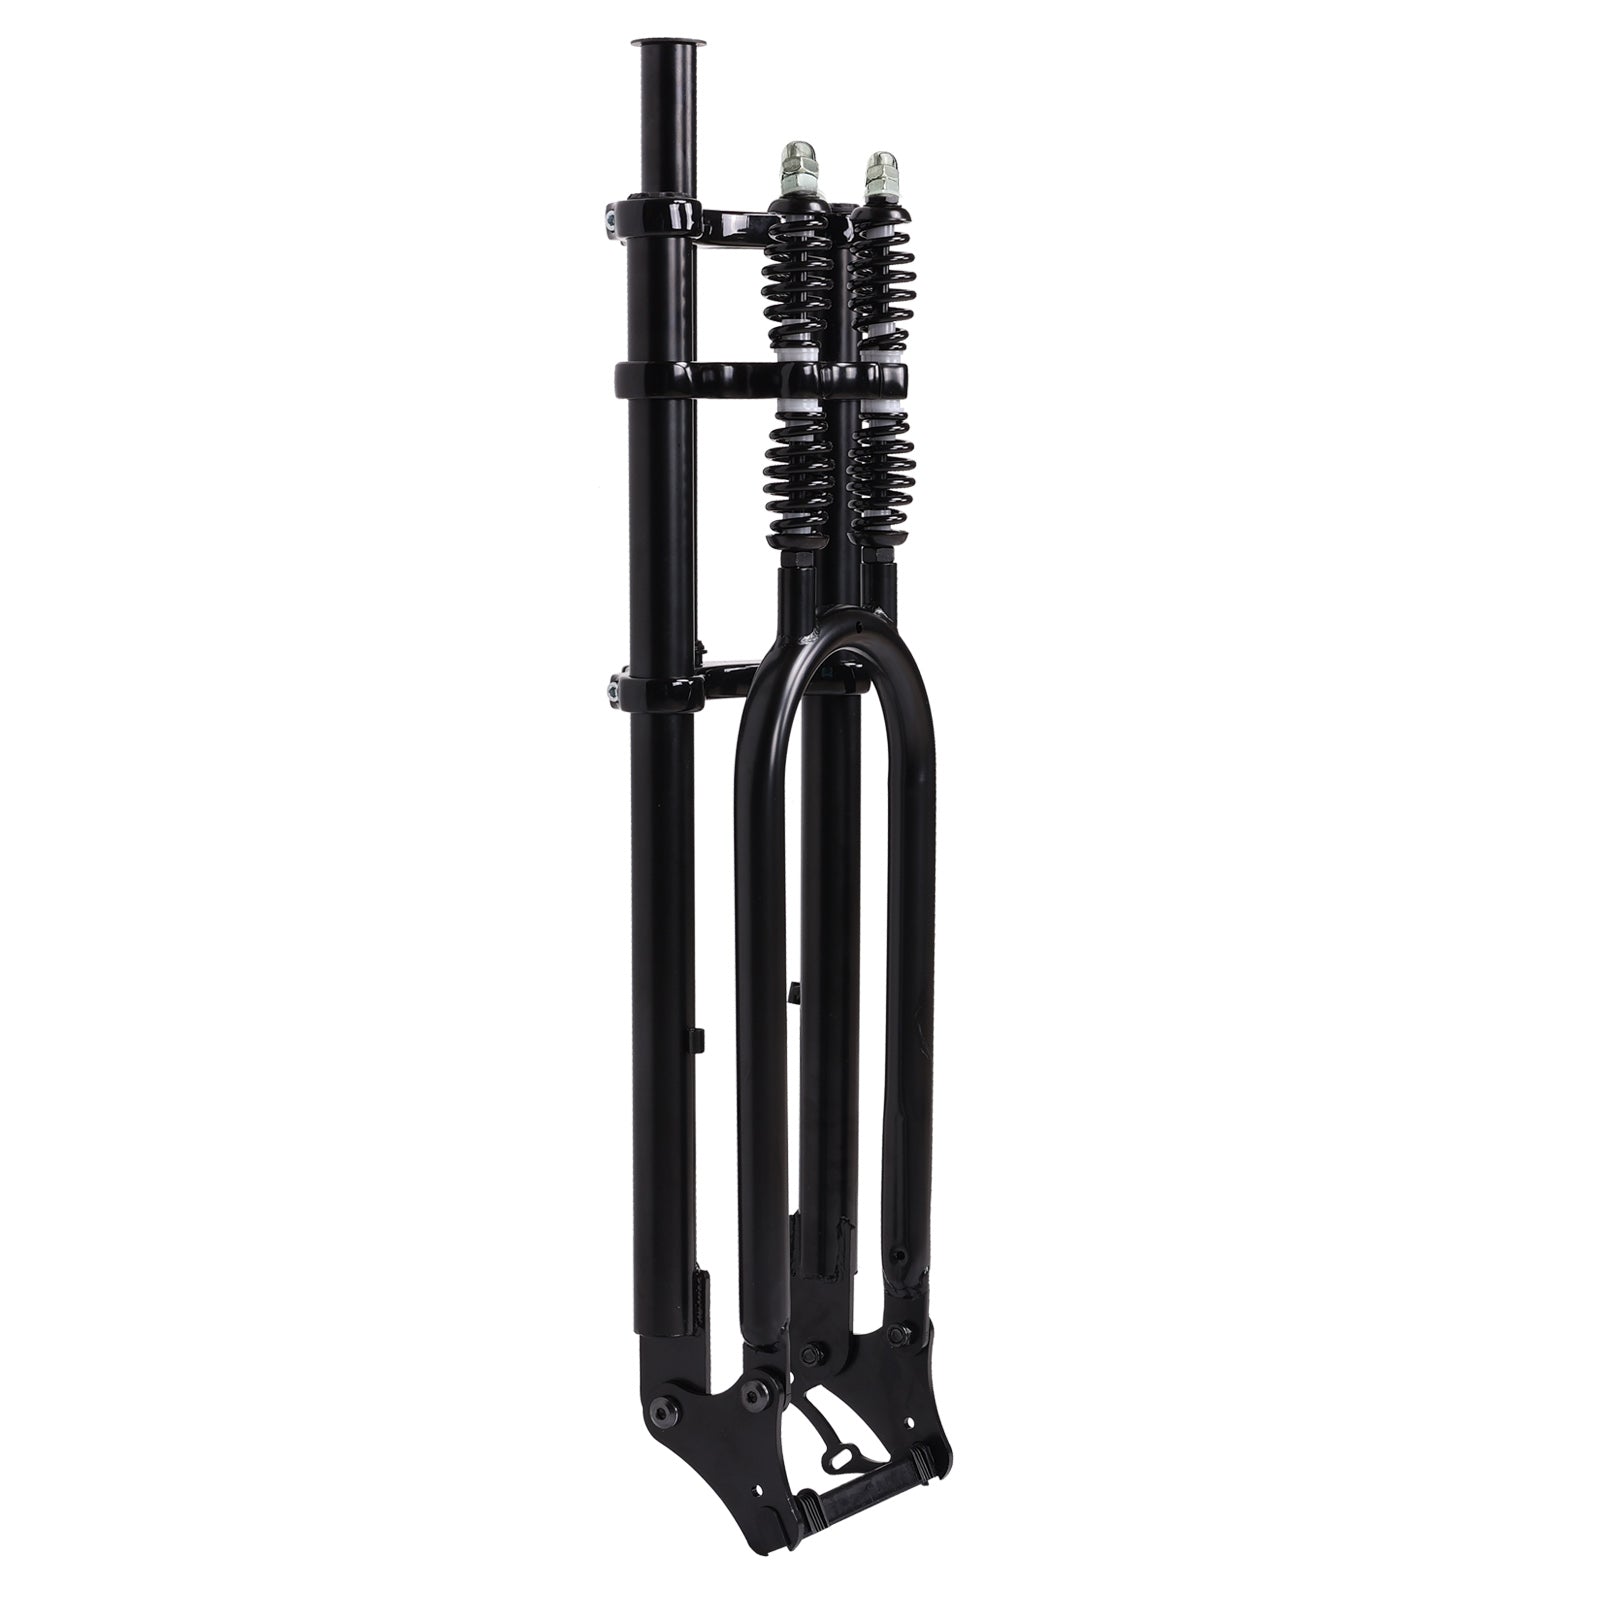 Tracer FK-GTS640305145D8 26'' Over and Under Dual Spring Adjustable Classical Fork for Disc Brake 1-1/8" (28.6mm)